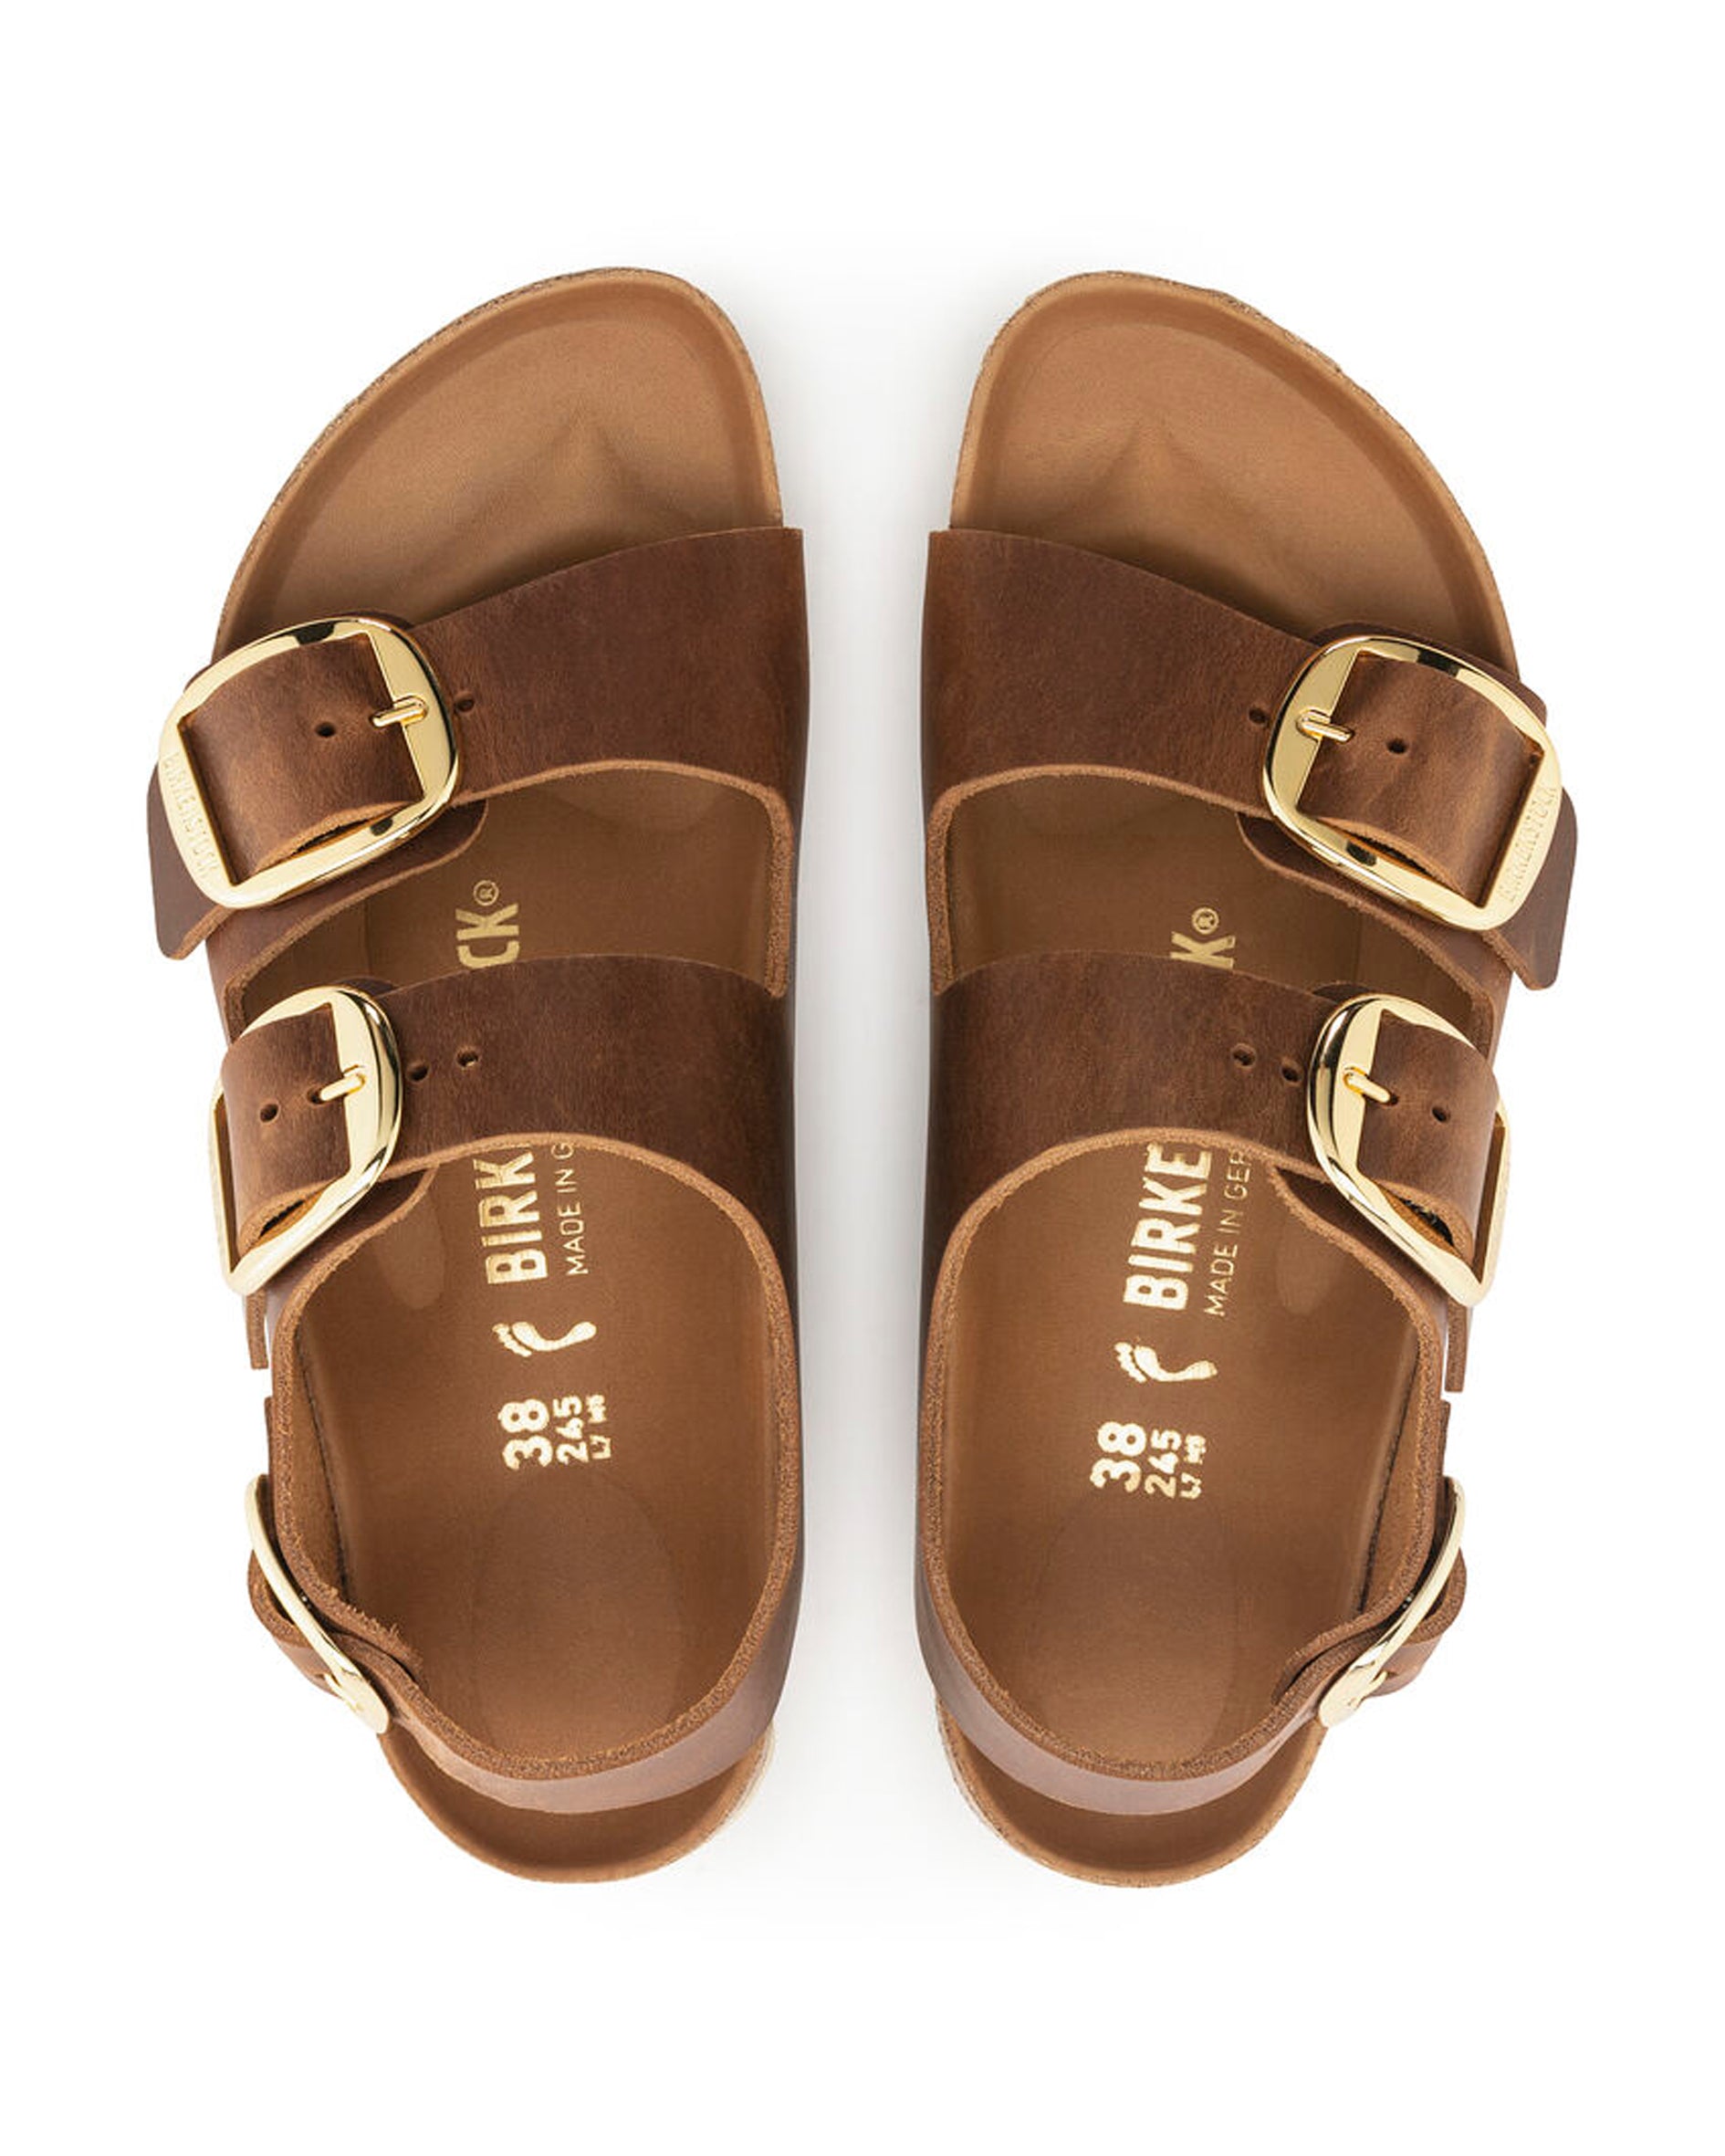 Milano Big Buckle Cognac Oiled Leather Sandals